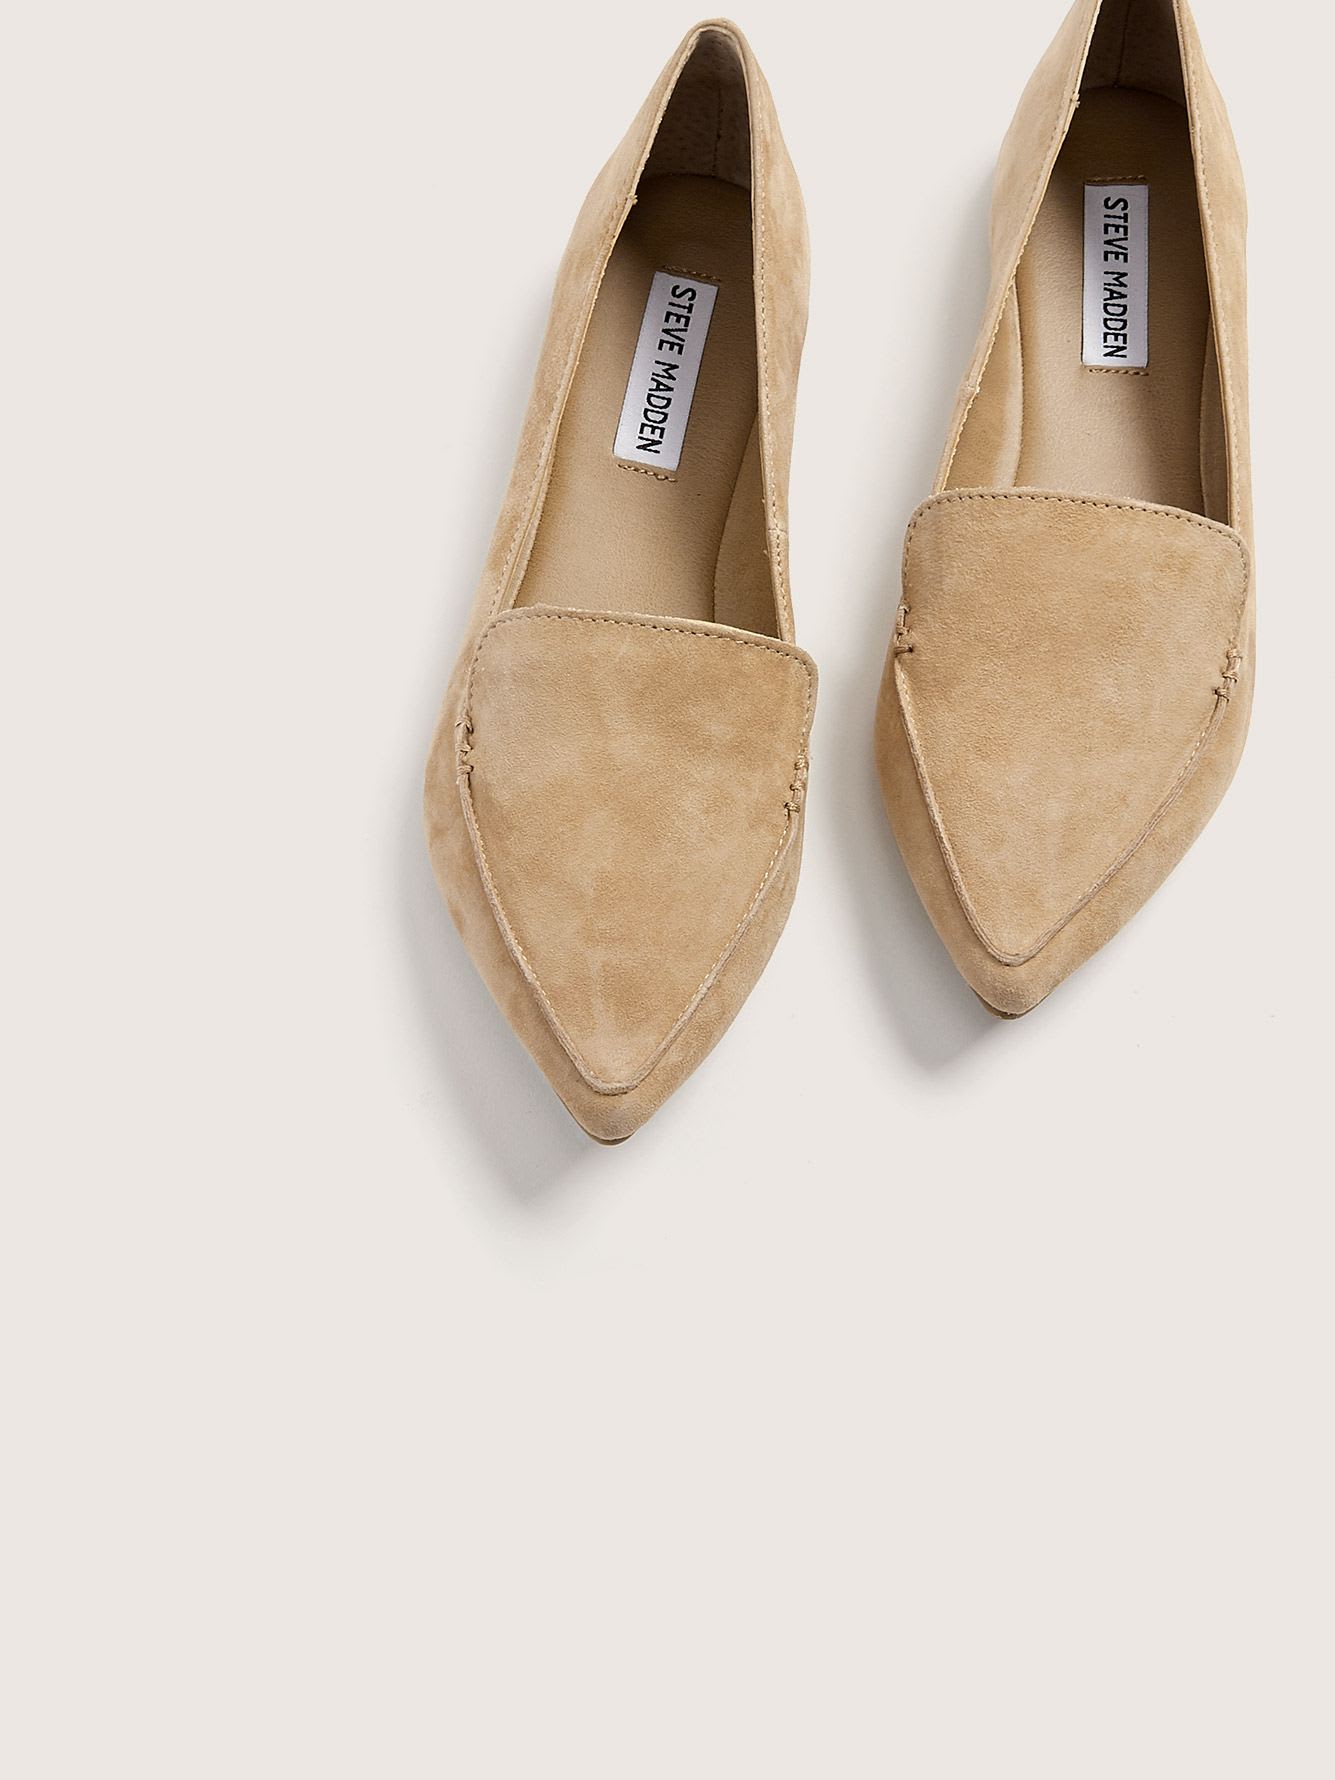 steve madden pointed toe loafers